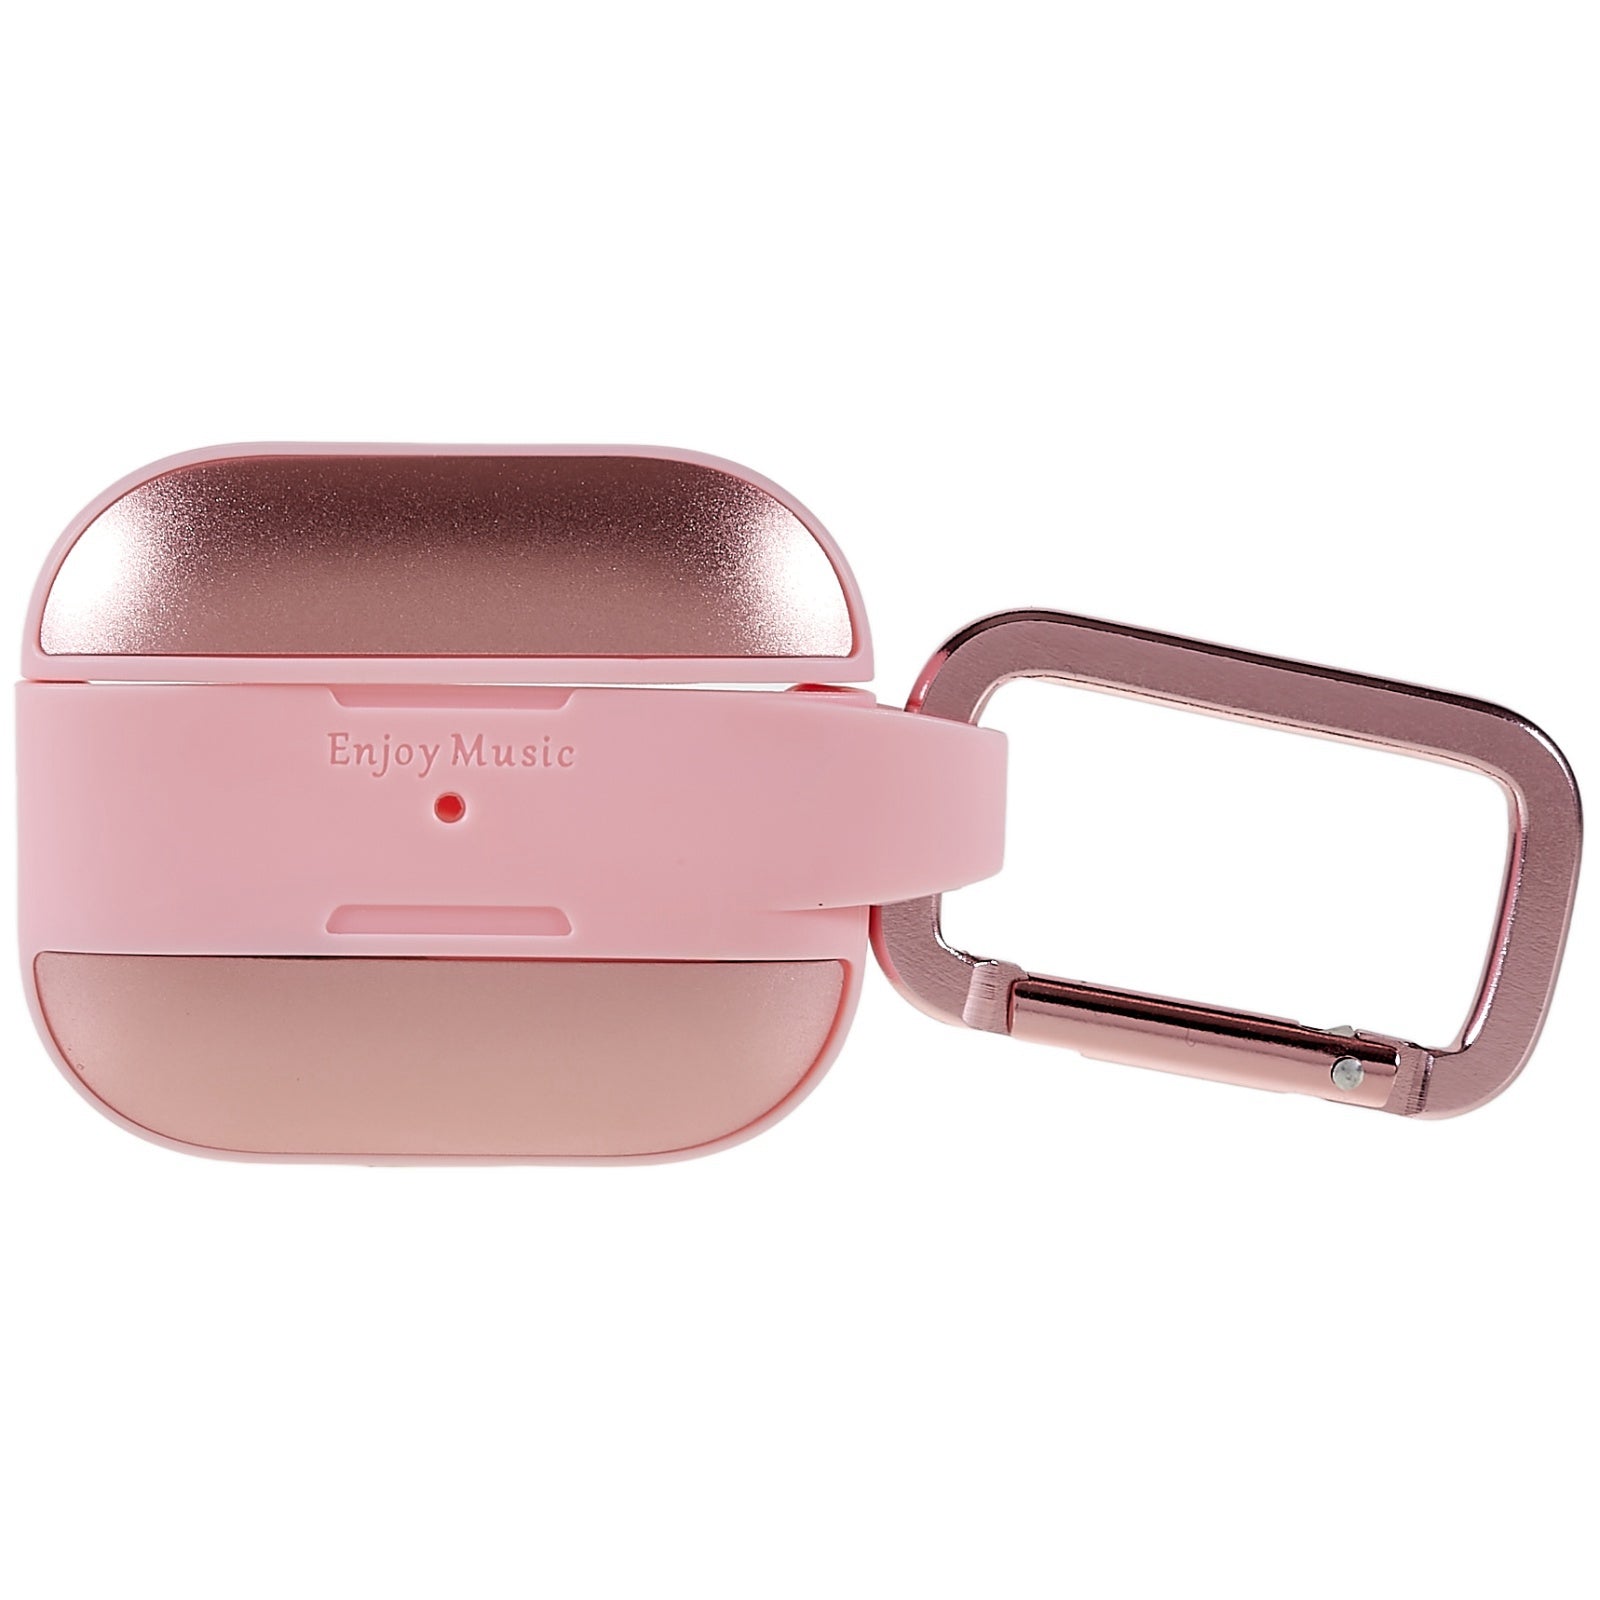 MUTURAL MEIWO Series For Apple AirPods 3 Anti-scratch Case Shockproof Soft TPU+PC Cover Earphone Case Shell - Pink